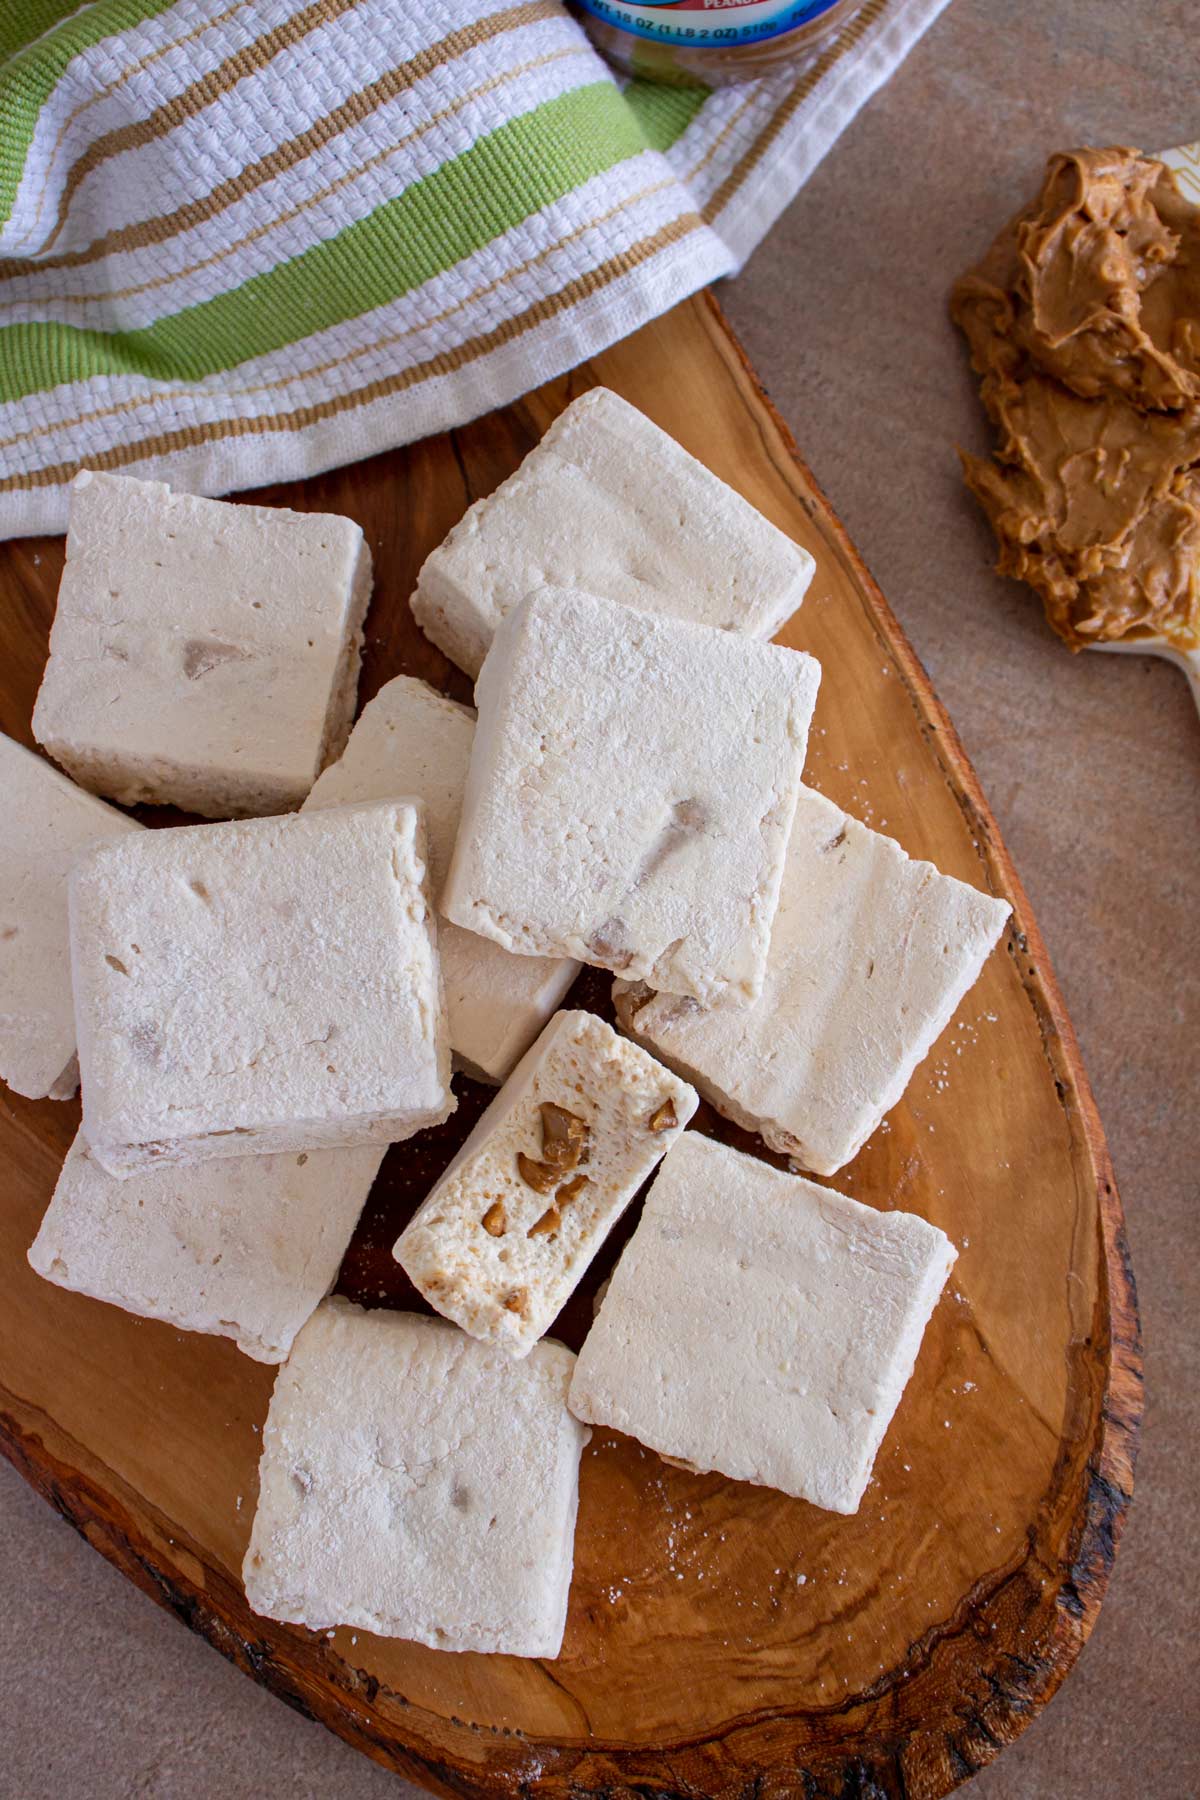 Square marshmallows with one partially eaten piled on an oval wooden board.